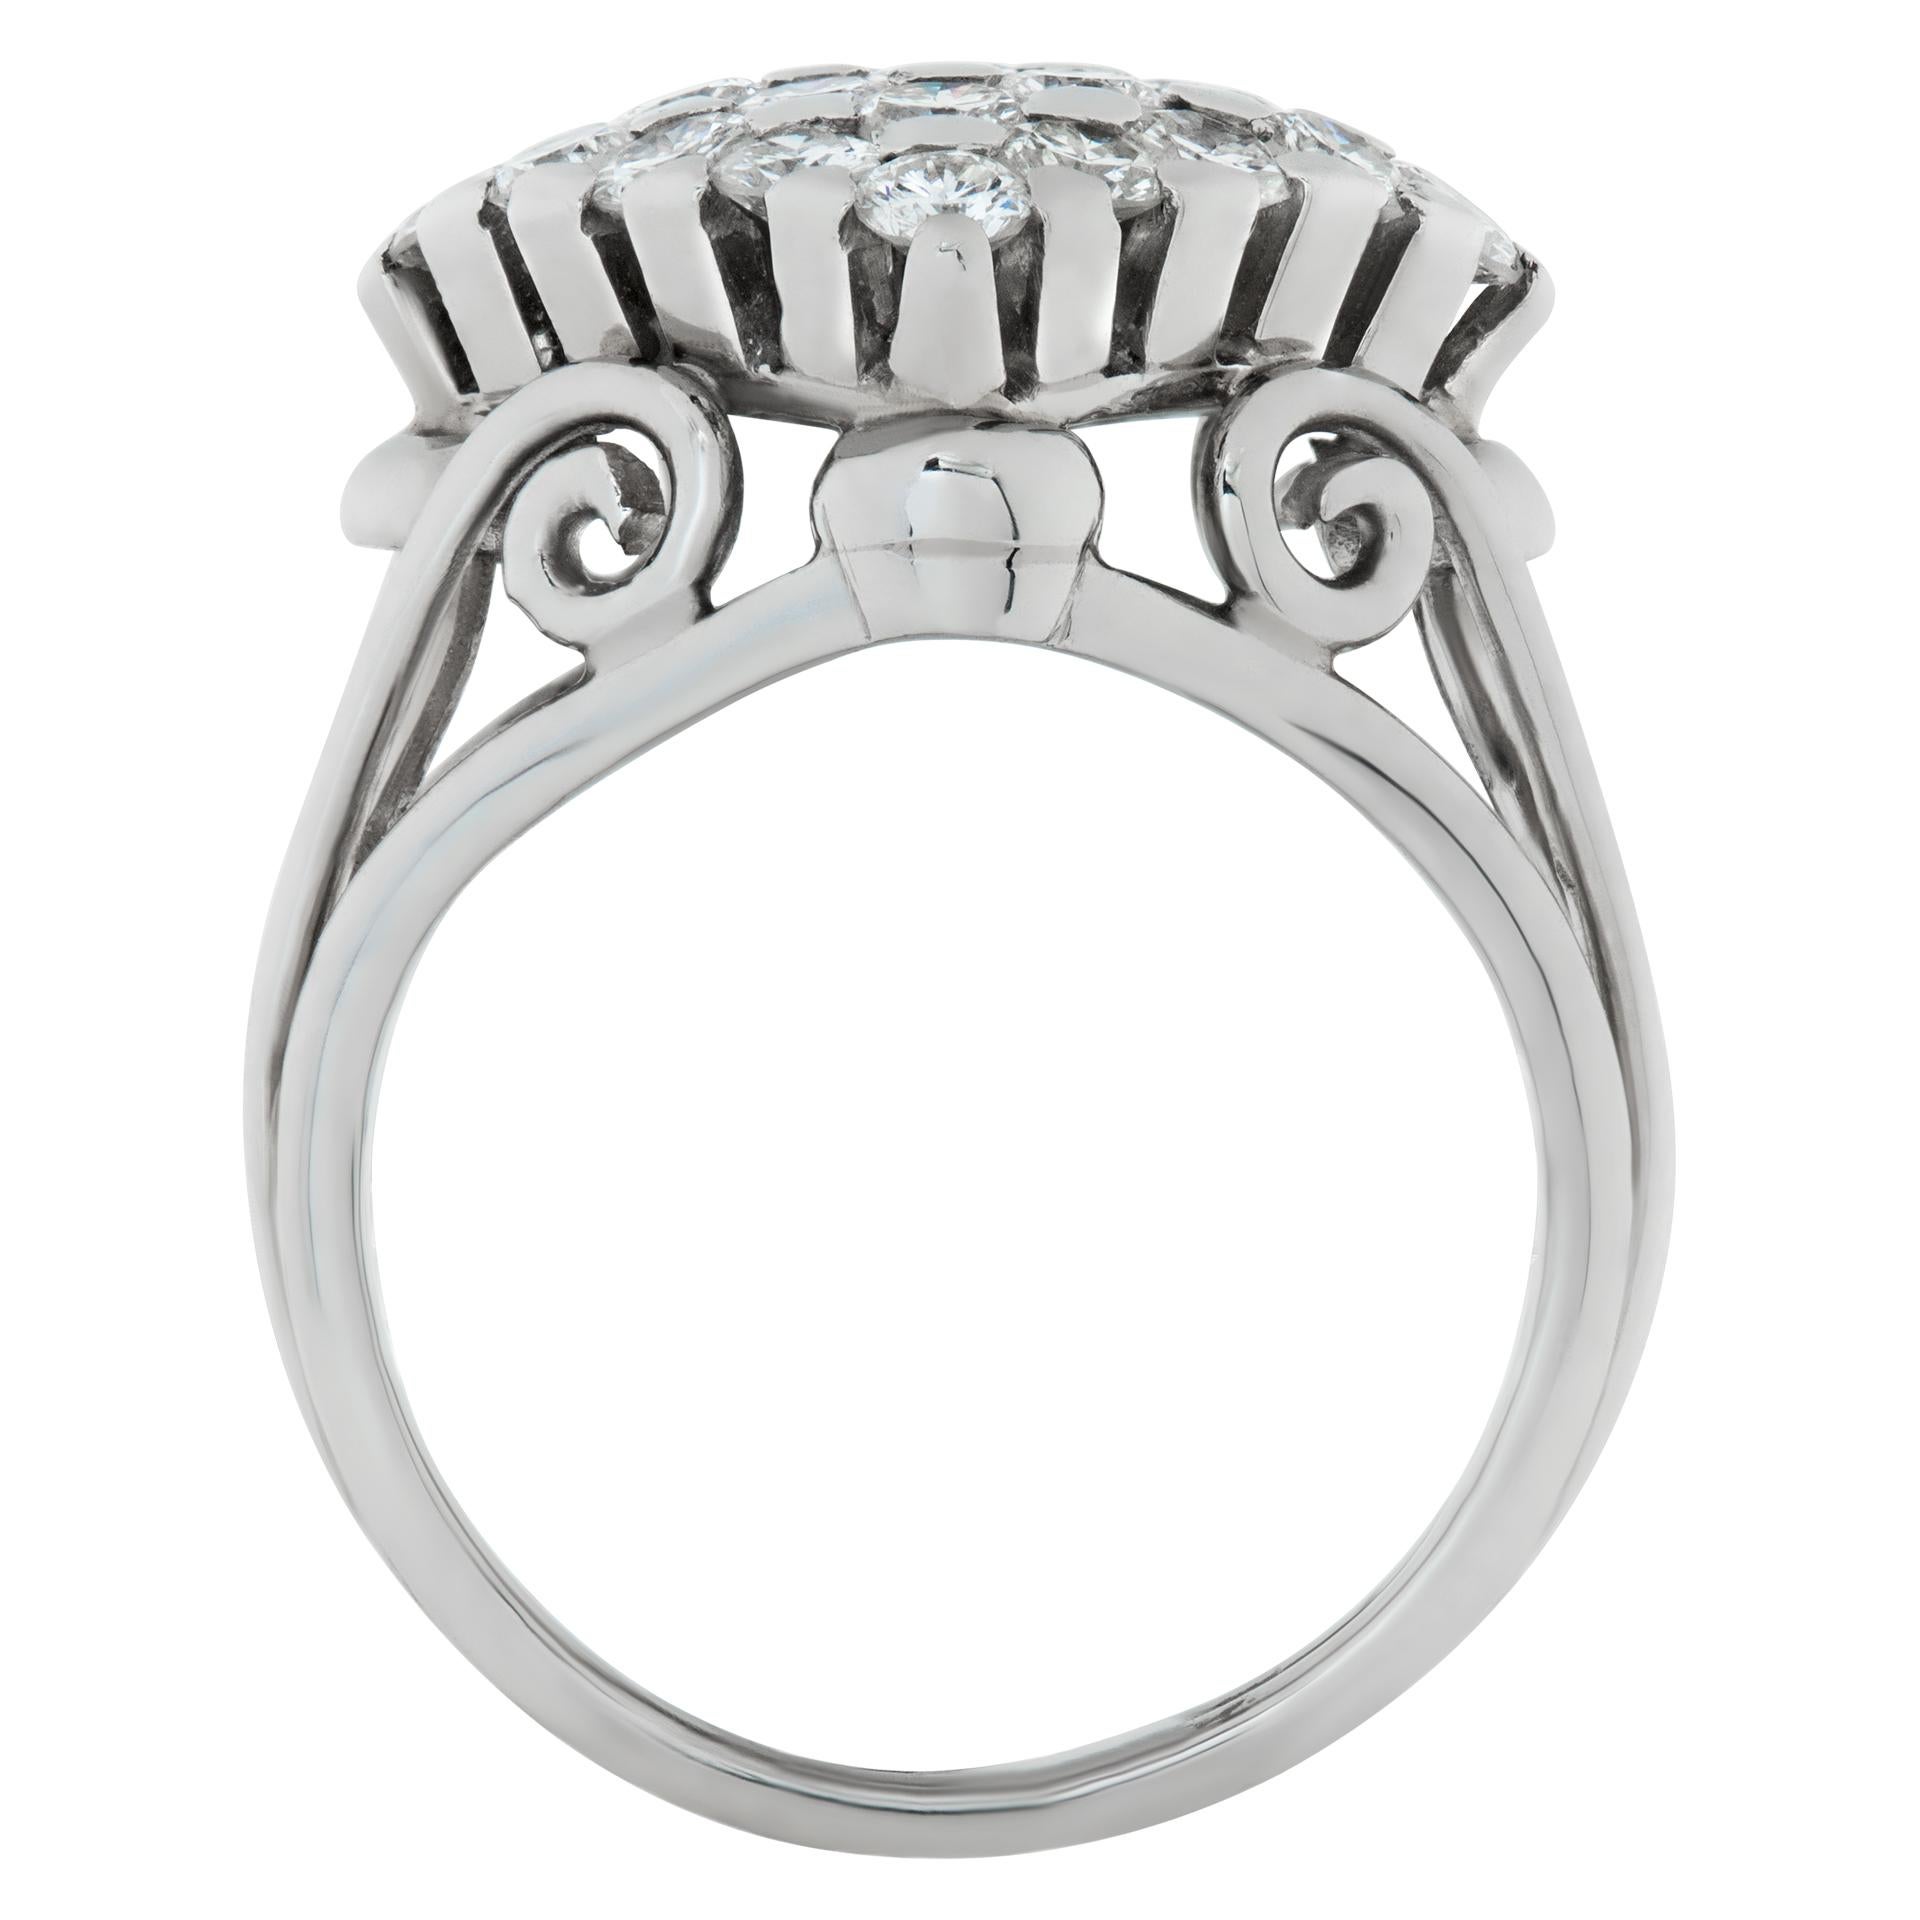 Women's Art Deco Platinum Ring with Approx 1.0 Carats in Pave Diamonds-Circa 1940's